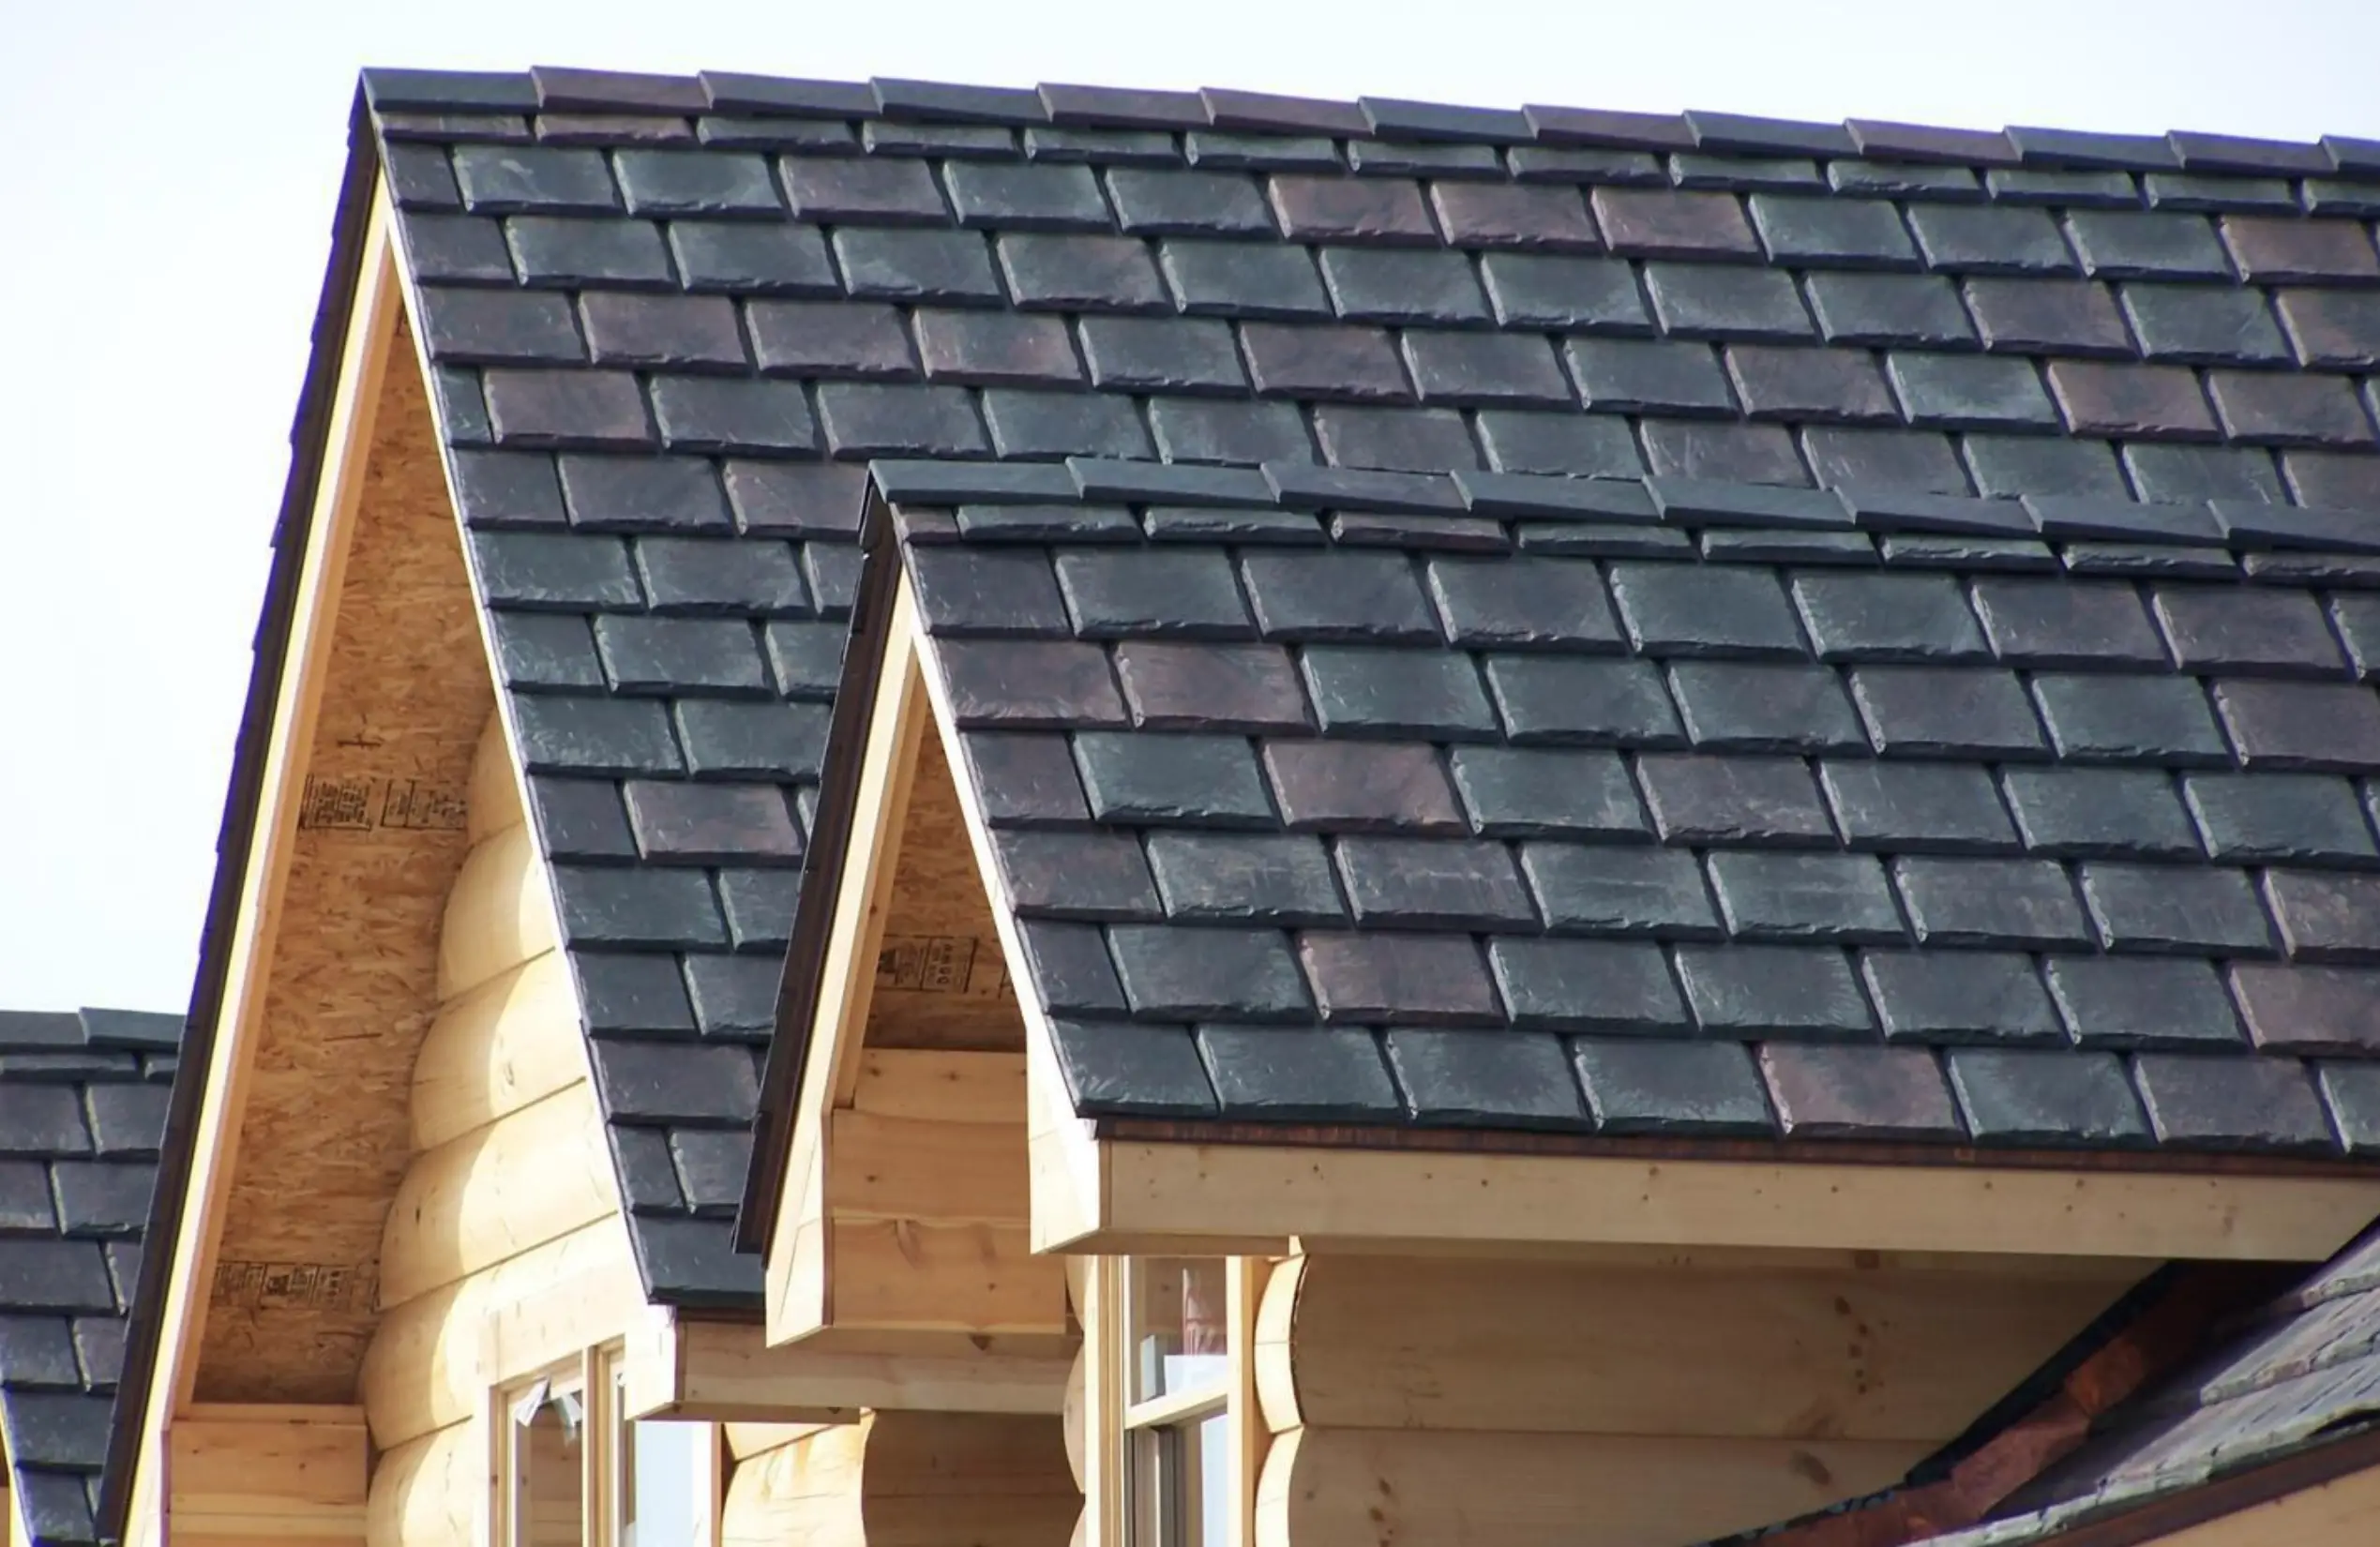 Rubber Slate Roof Tiles: Are They Better Than Real Slate Tiles?